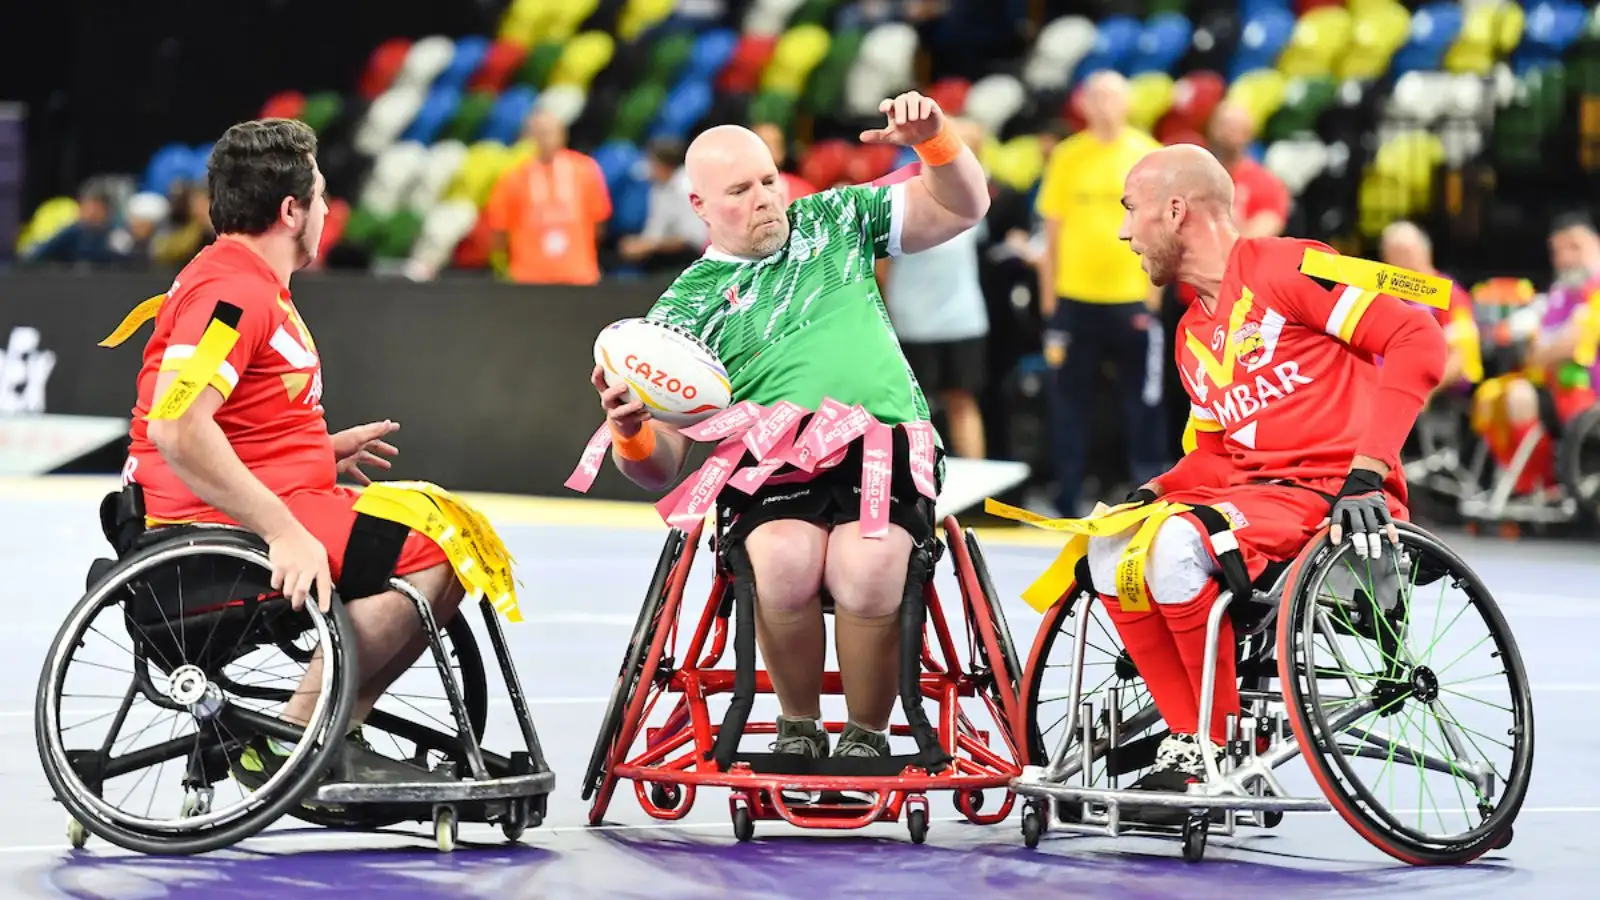 “I lost count” – Wigan wheelchair coach hails post-World Cup crowd boost